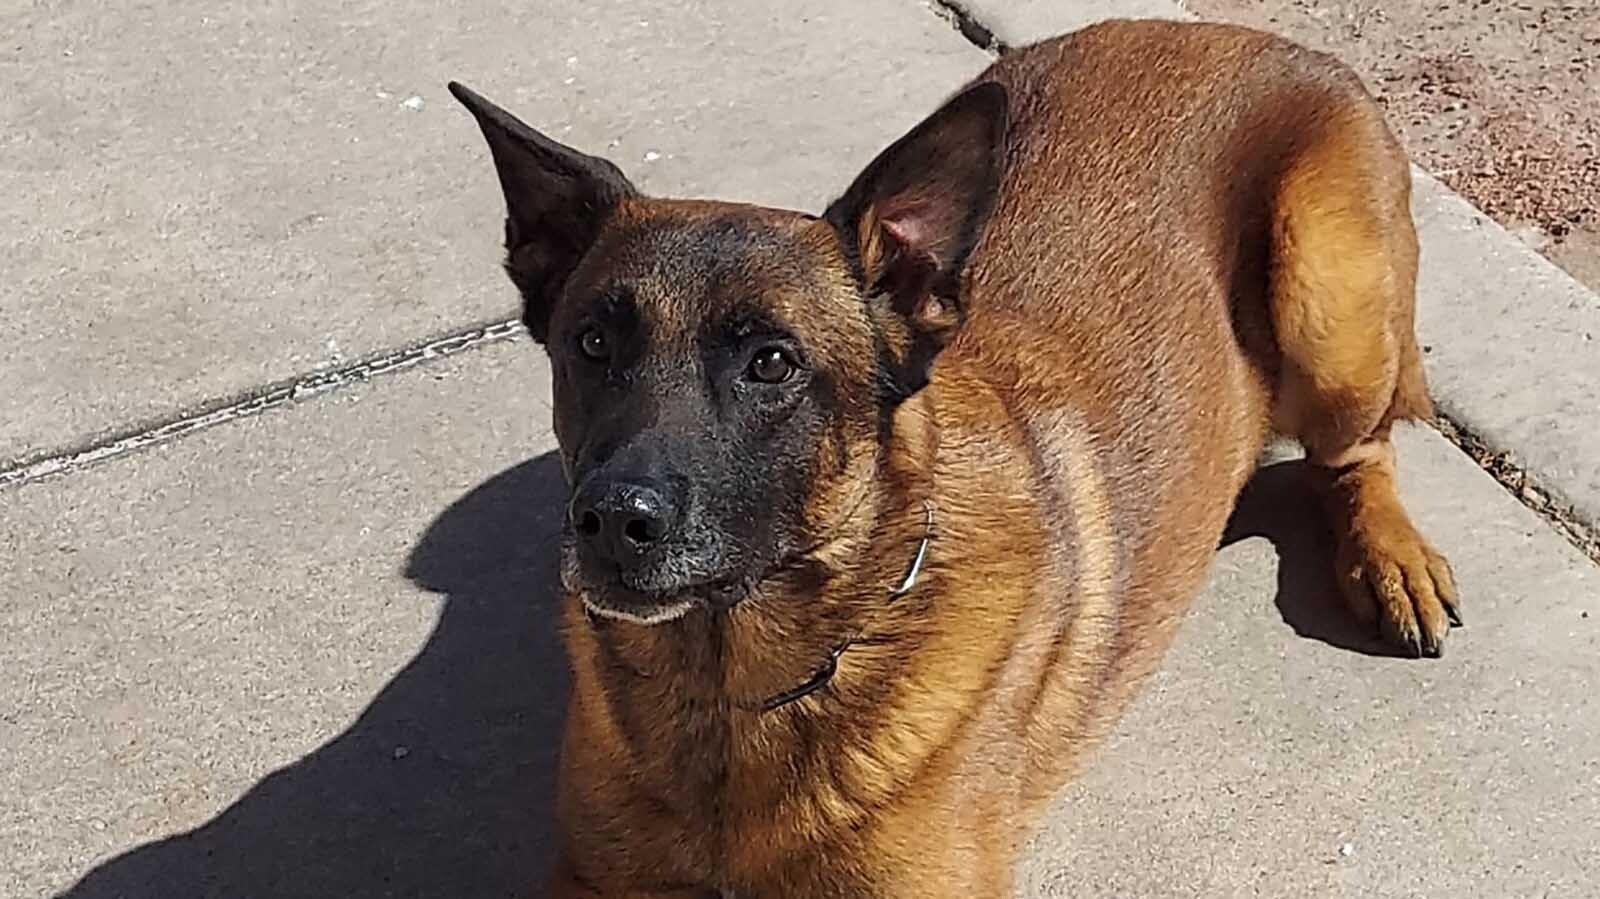 Bilko recently retired as a K-9 officer for the Gillette Police Department. He was born for police work, earning a reputation as the "Michael Jordan" of K-9s.